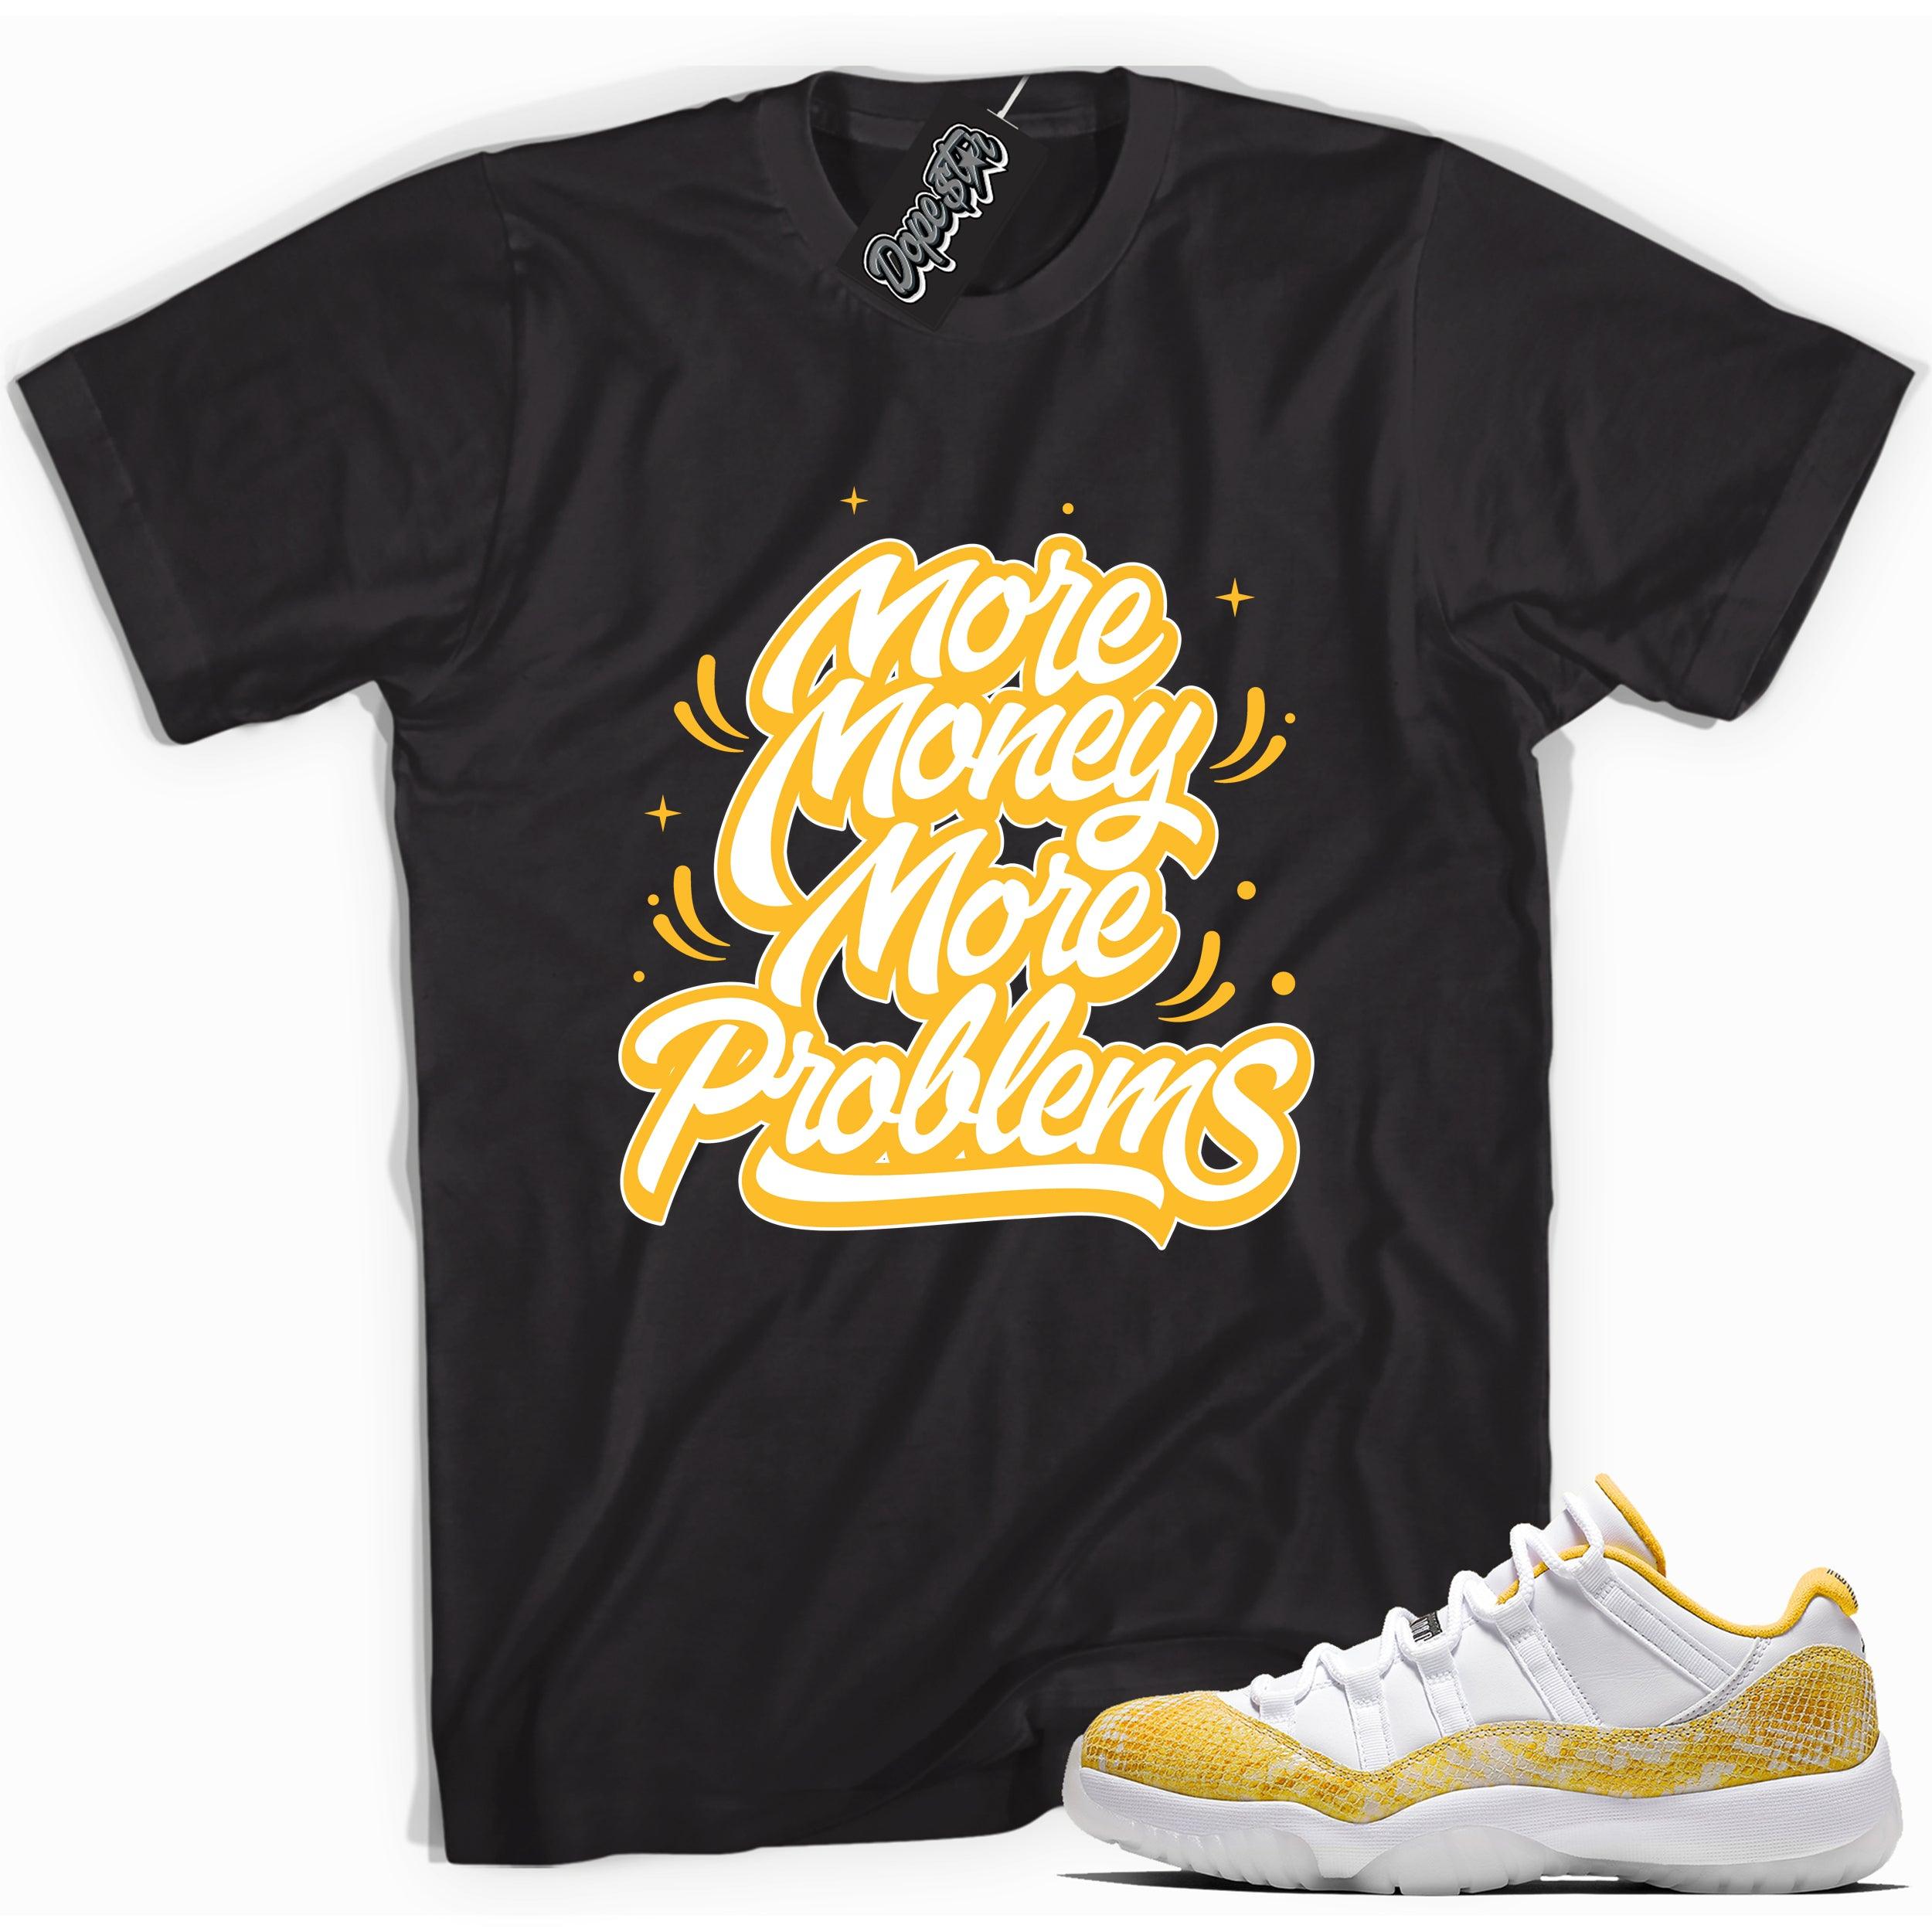 Cool black graphic tee with 'more money more problems' print, that perfectly matches  Air Jordan 11 Low Yellow Snakeskin sneakers